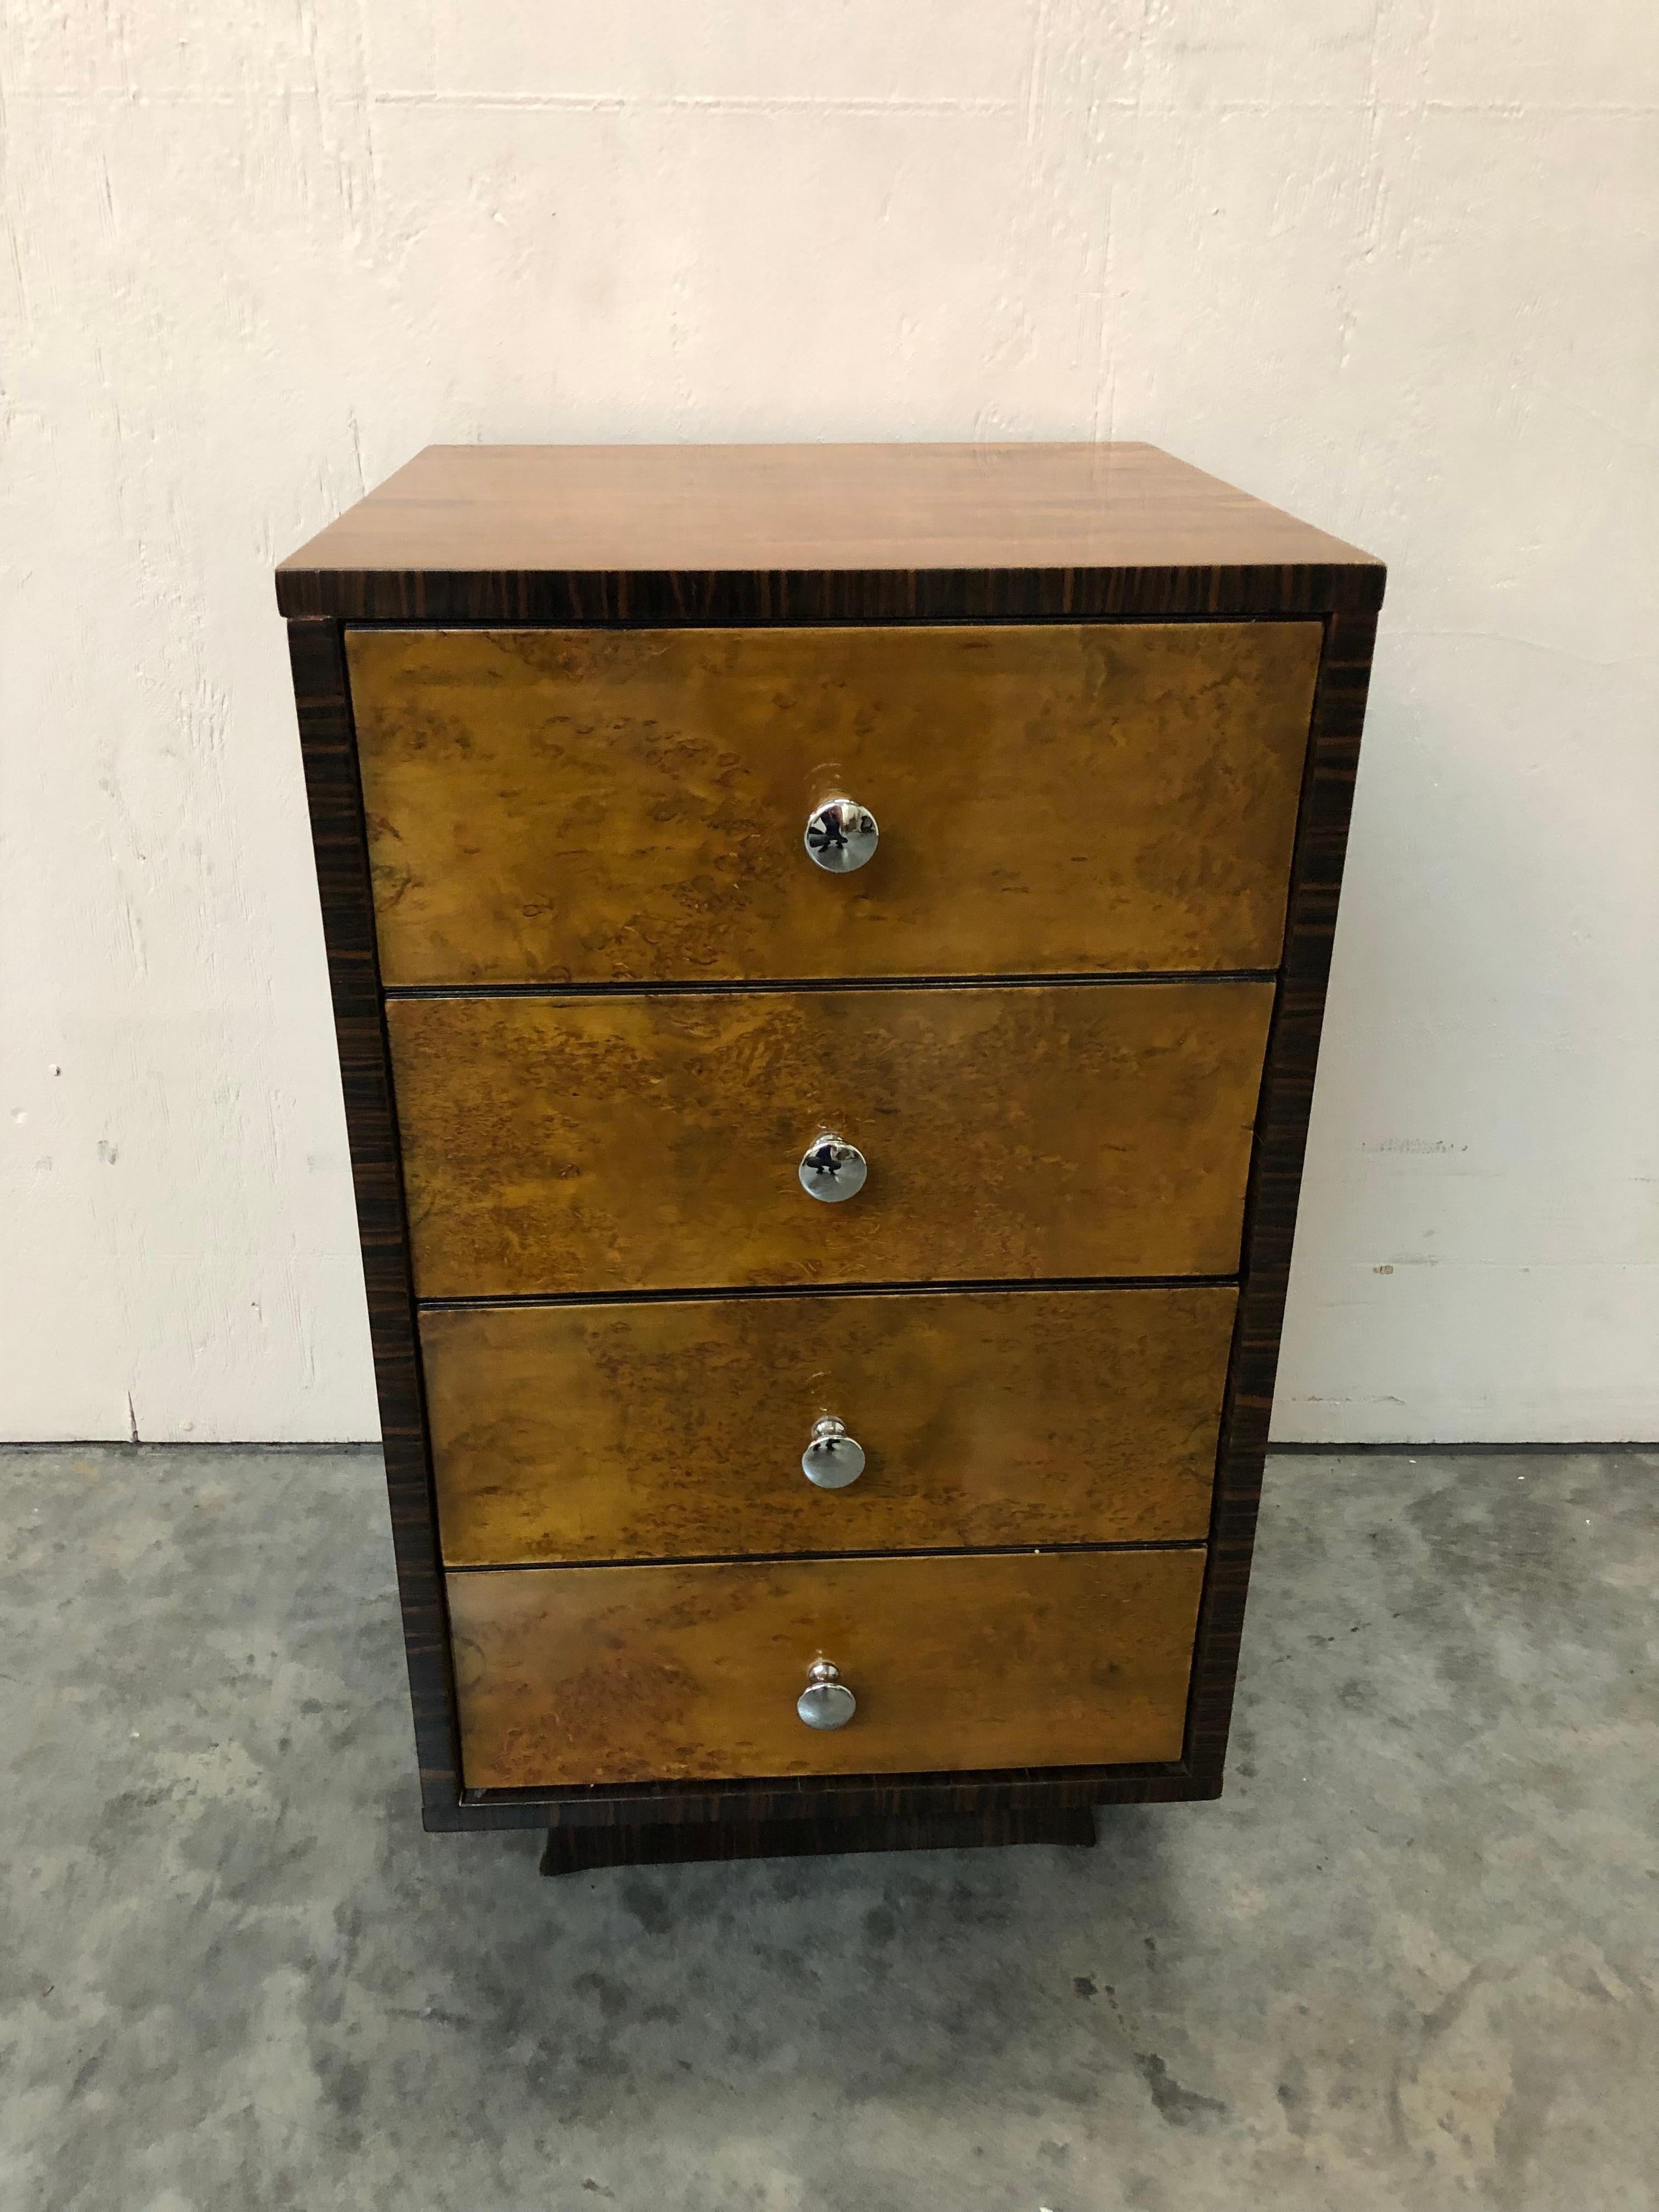 Material: wood 
Style: Art Deco French
If you want to live in the golden years, this is the cupboard that your project needs.
We have specialized in the sale of Art Deco and Art Nouveau and Vintage styles since 1982. If you have any questions we are